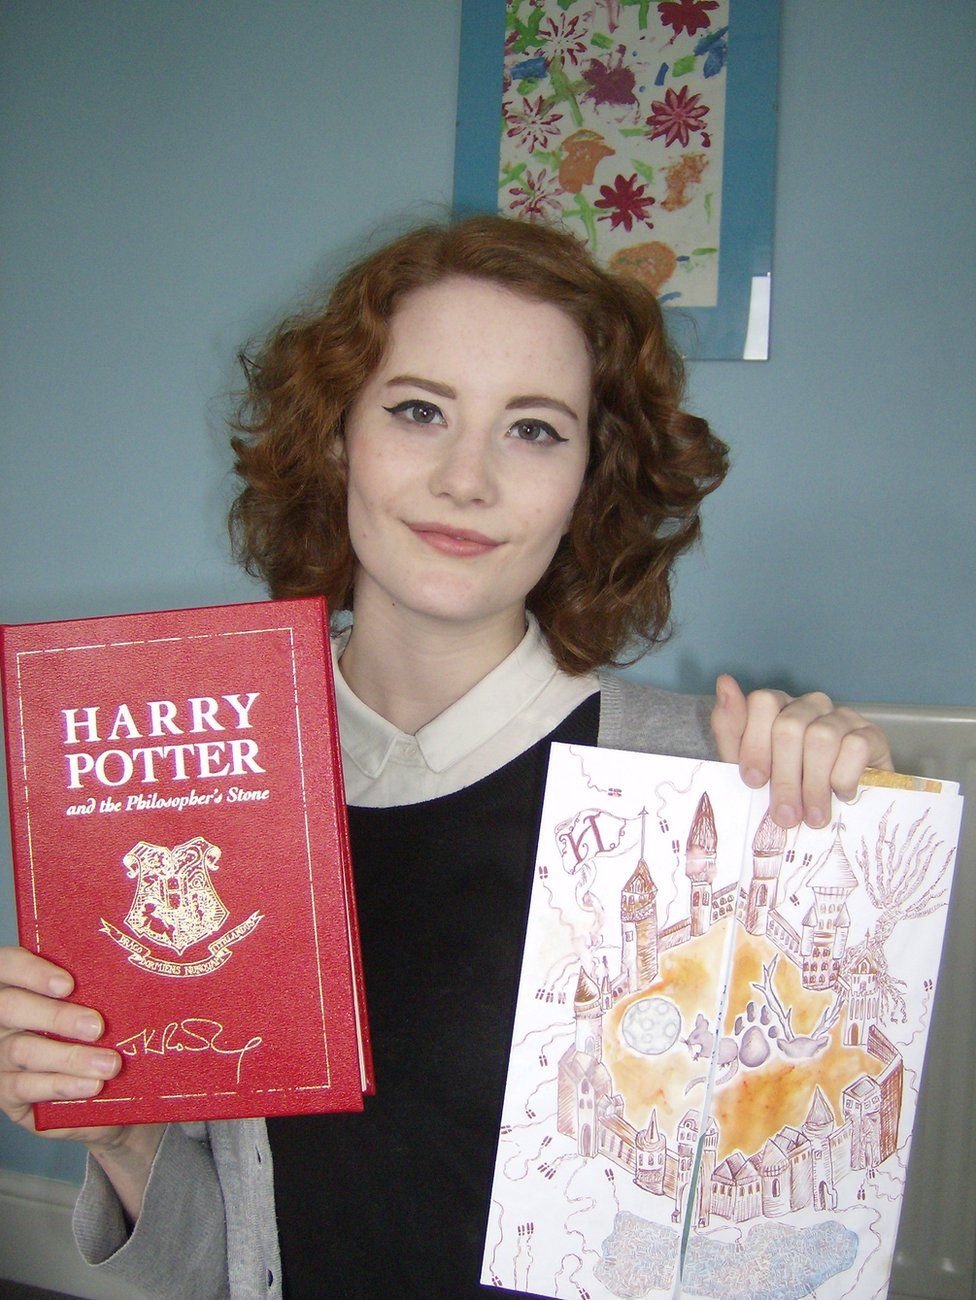 Chloe Esslemont holding the book and her colourful competition letter